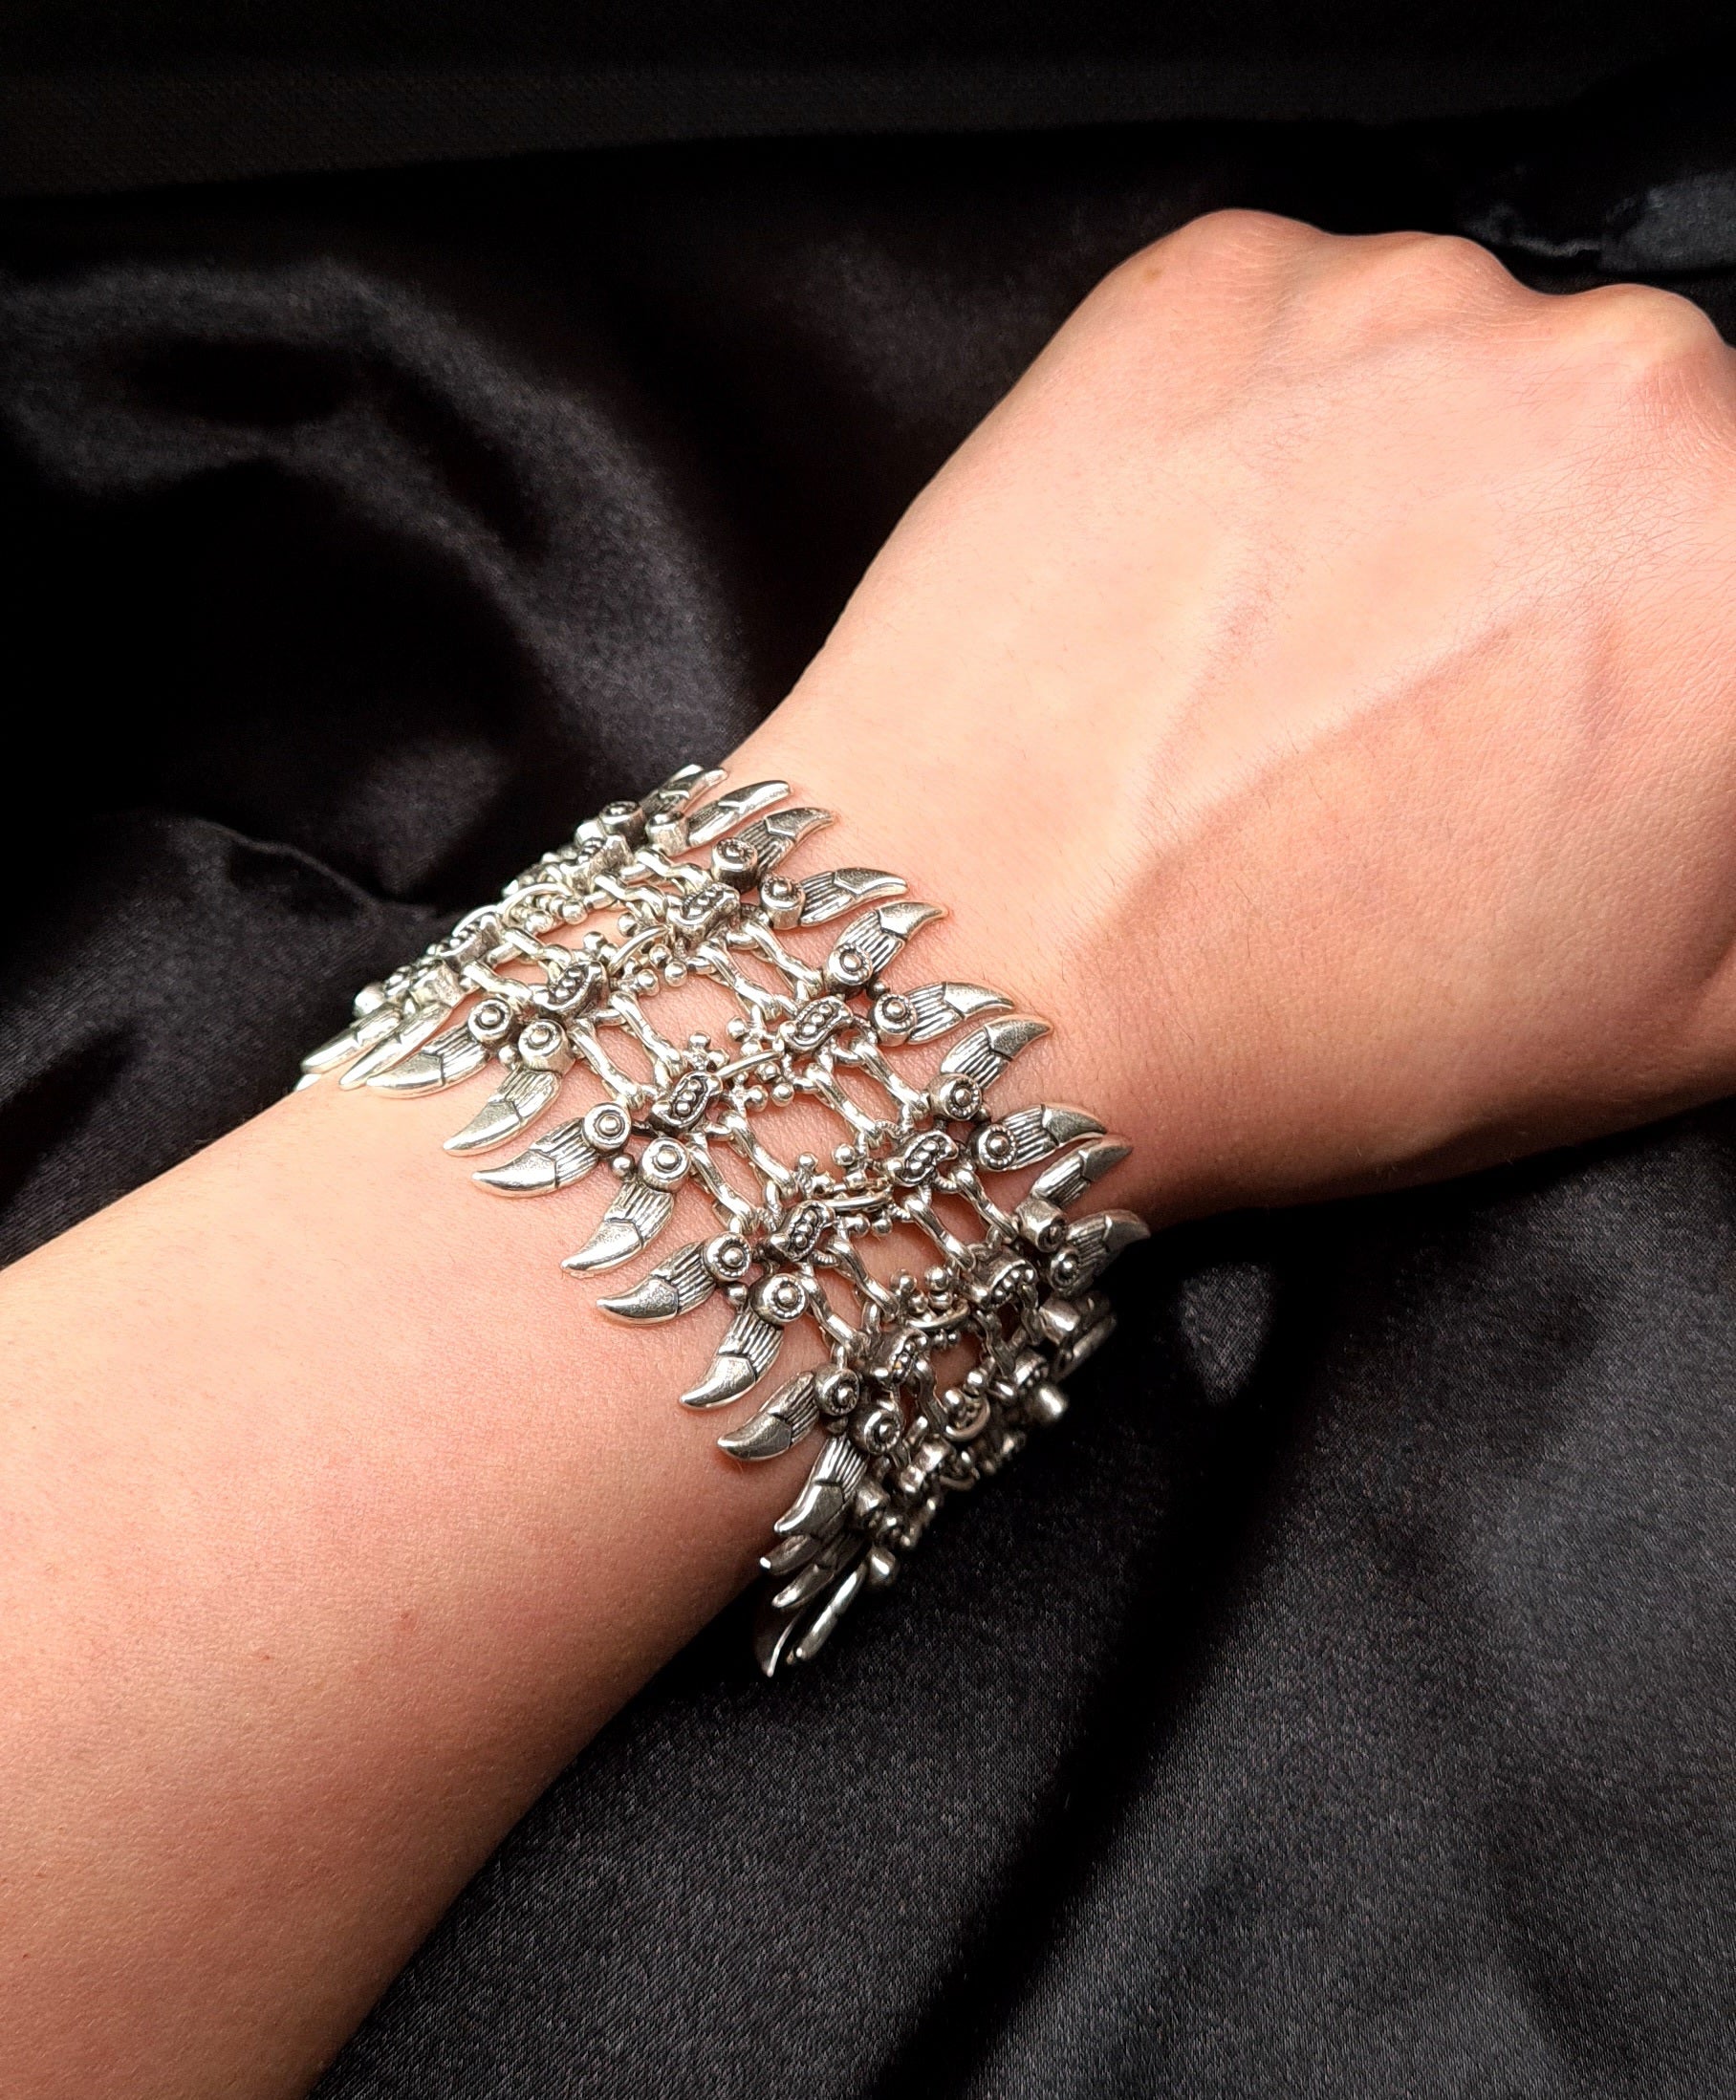 a woman hand wearing A silver bracelet with a claw design on it. The bracelet is made of silver and has a delicate design. The claw design is in the center of the bracelet and is made up of small, interlocking pieces. The bracelet is sitting on a black cloth 